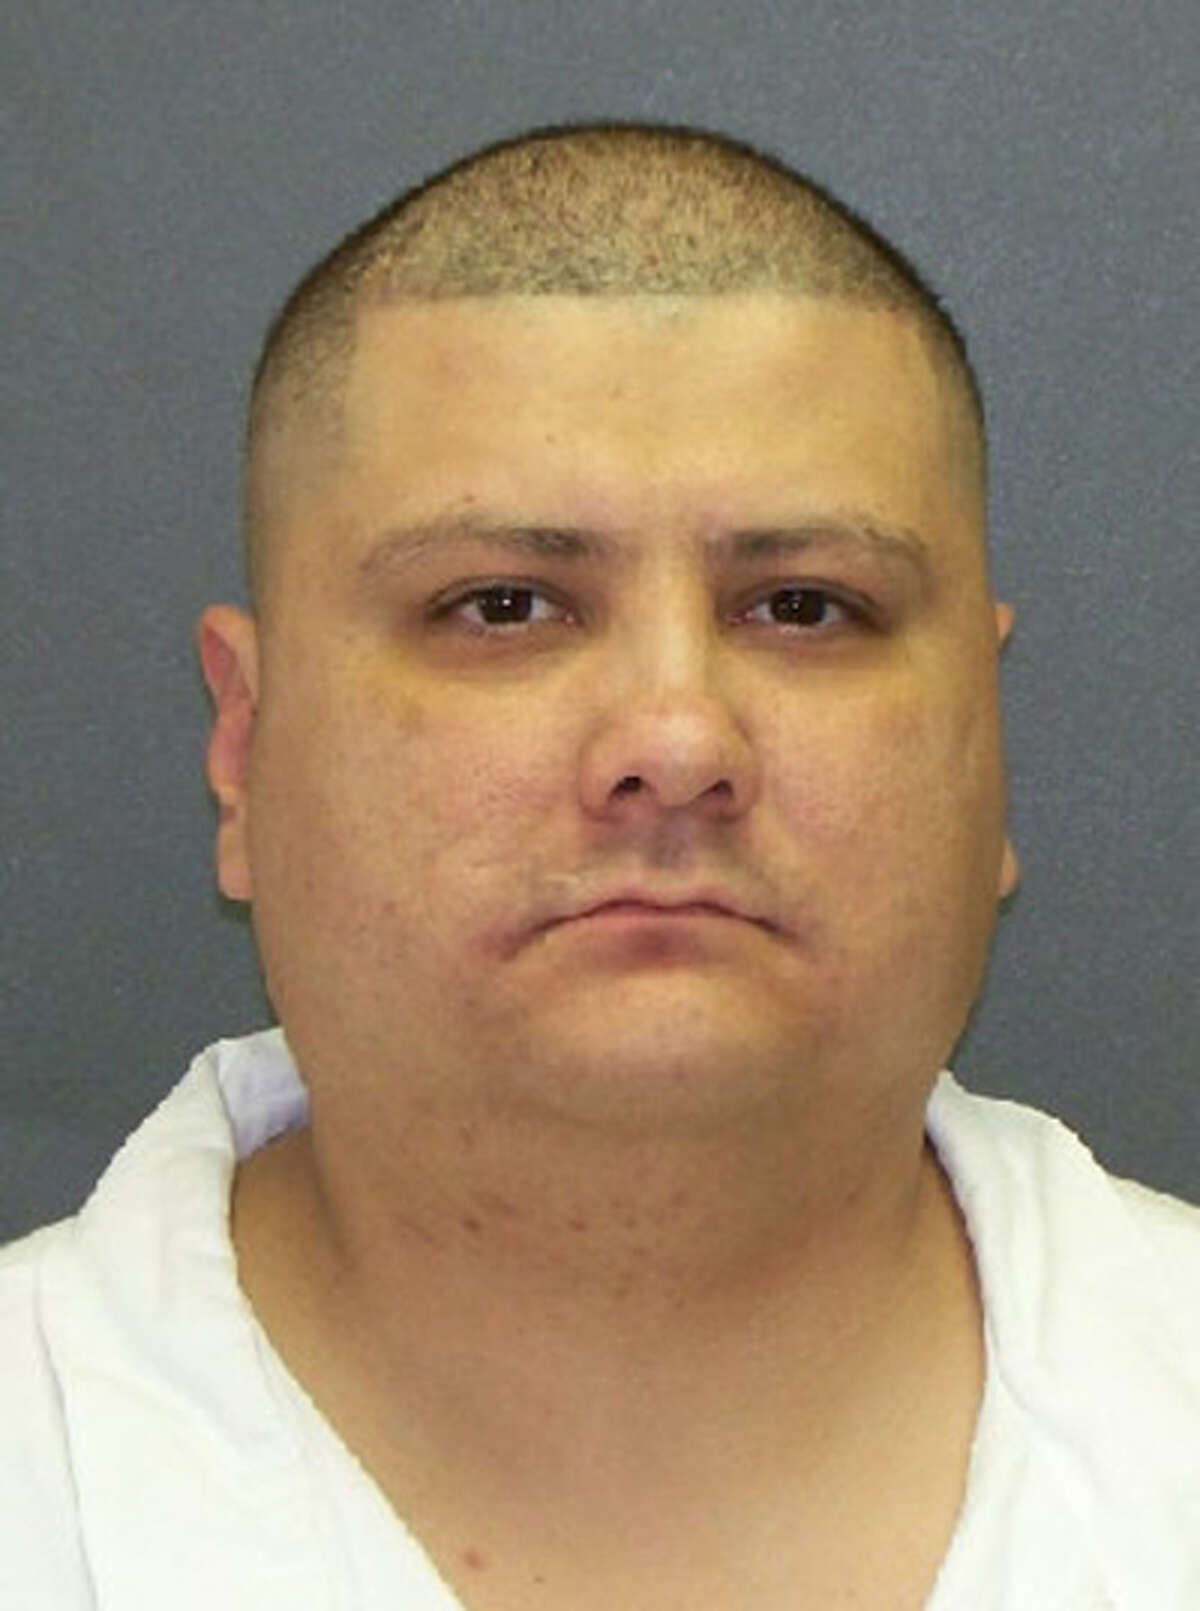 Gilbert Flores, 41, was shot and killed by Bexar County Sheriff's Office deputies on Aug. 28.